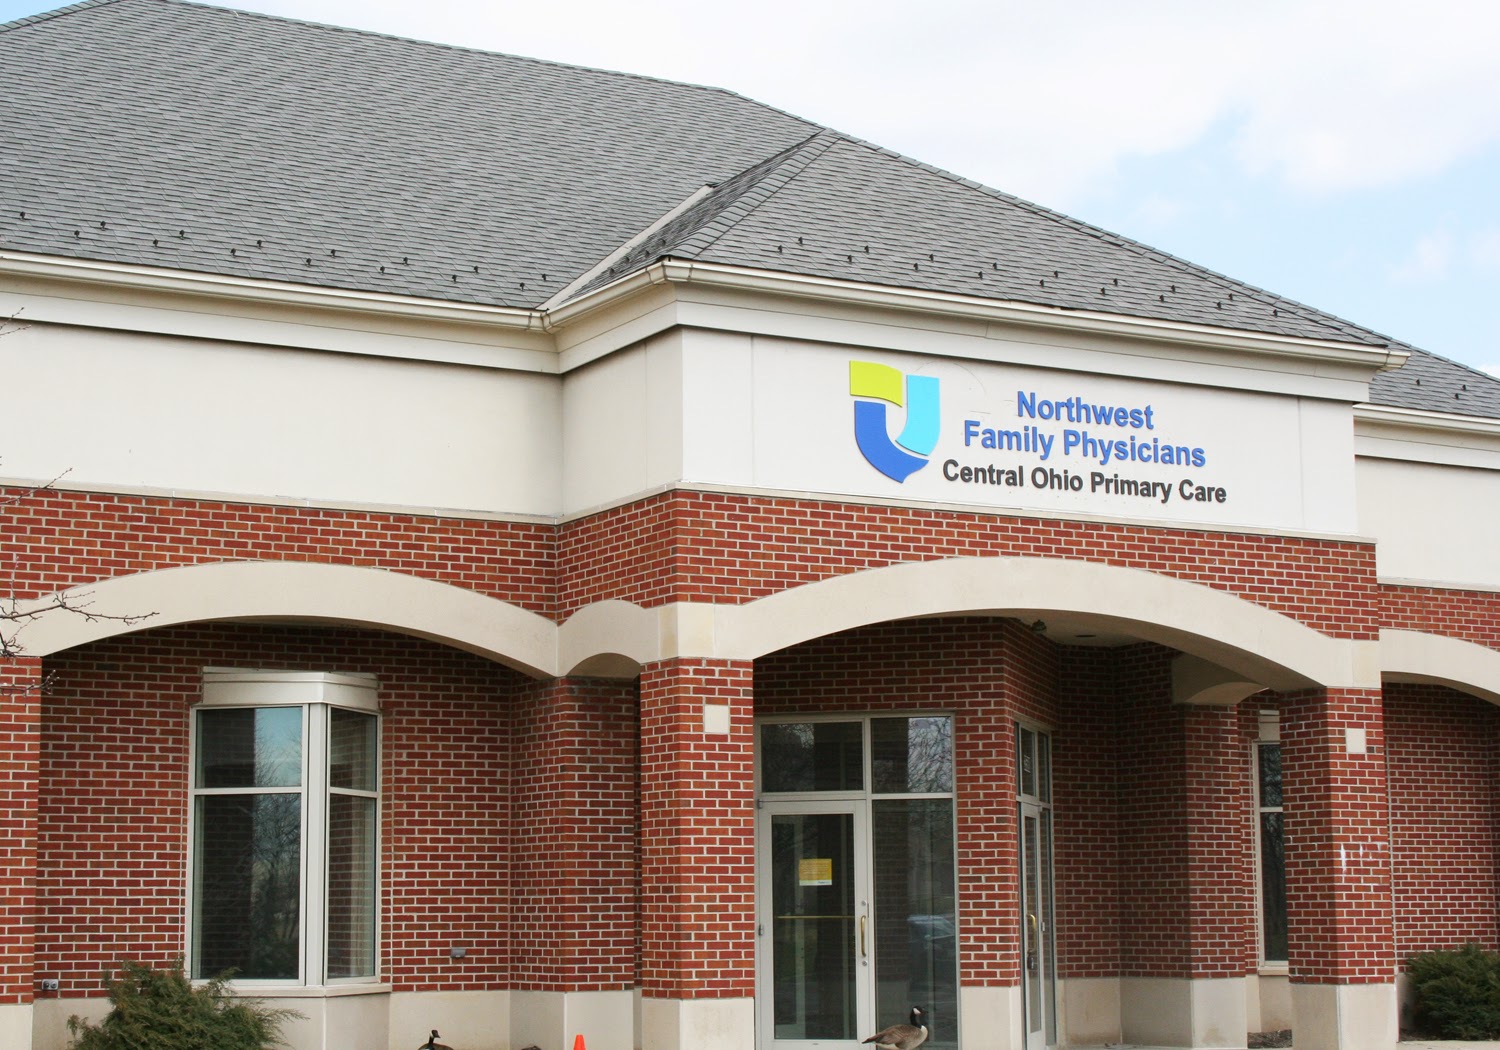 Northwest Family Physicians - Central Ohio Primary Care